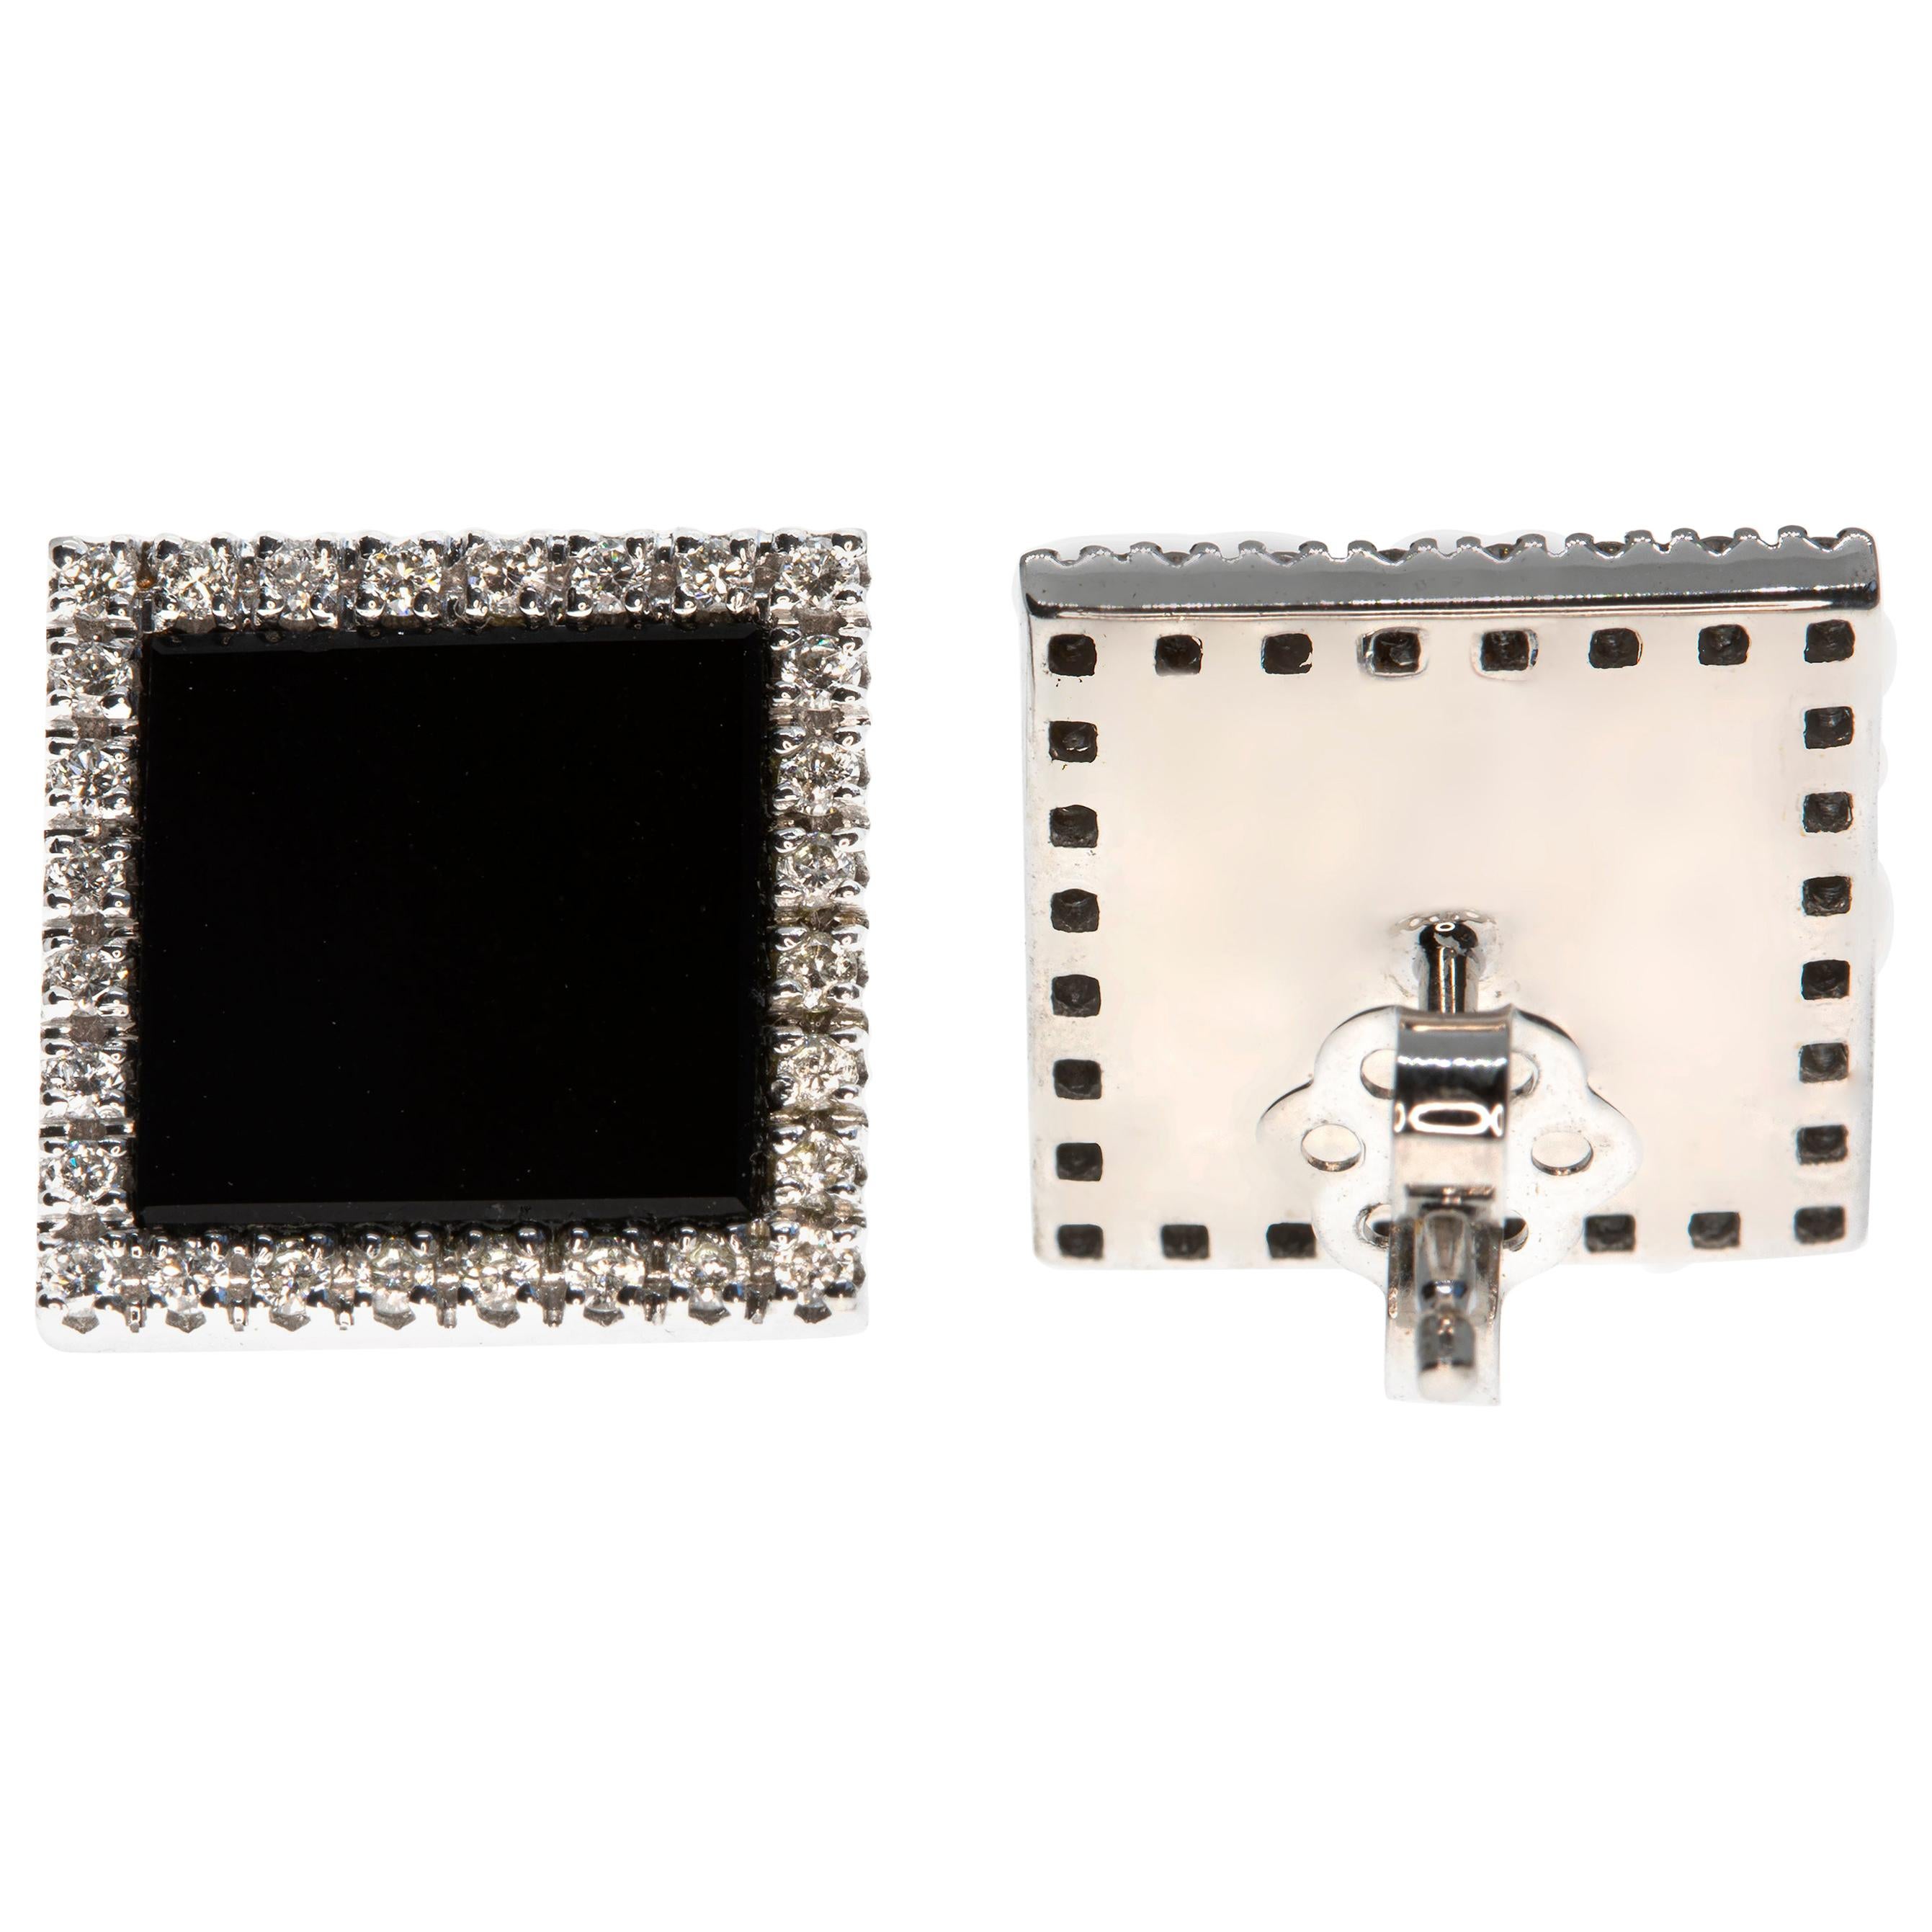 These square onyx earrings, masterfully created by hand from 18-karat white gold, are set with a border of brilliant white diamonds.

This is a delightful pair of earrings with post and butterfly backs. They measure 13 millimetres across. 

Looking